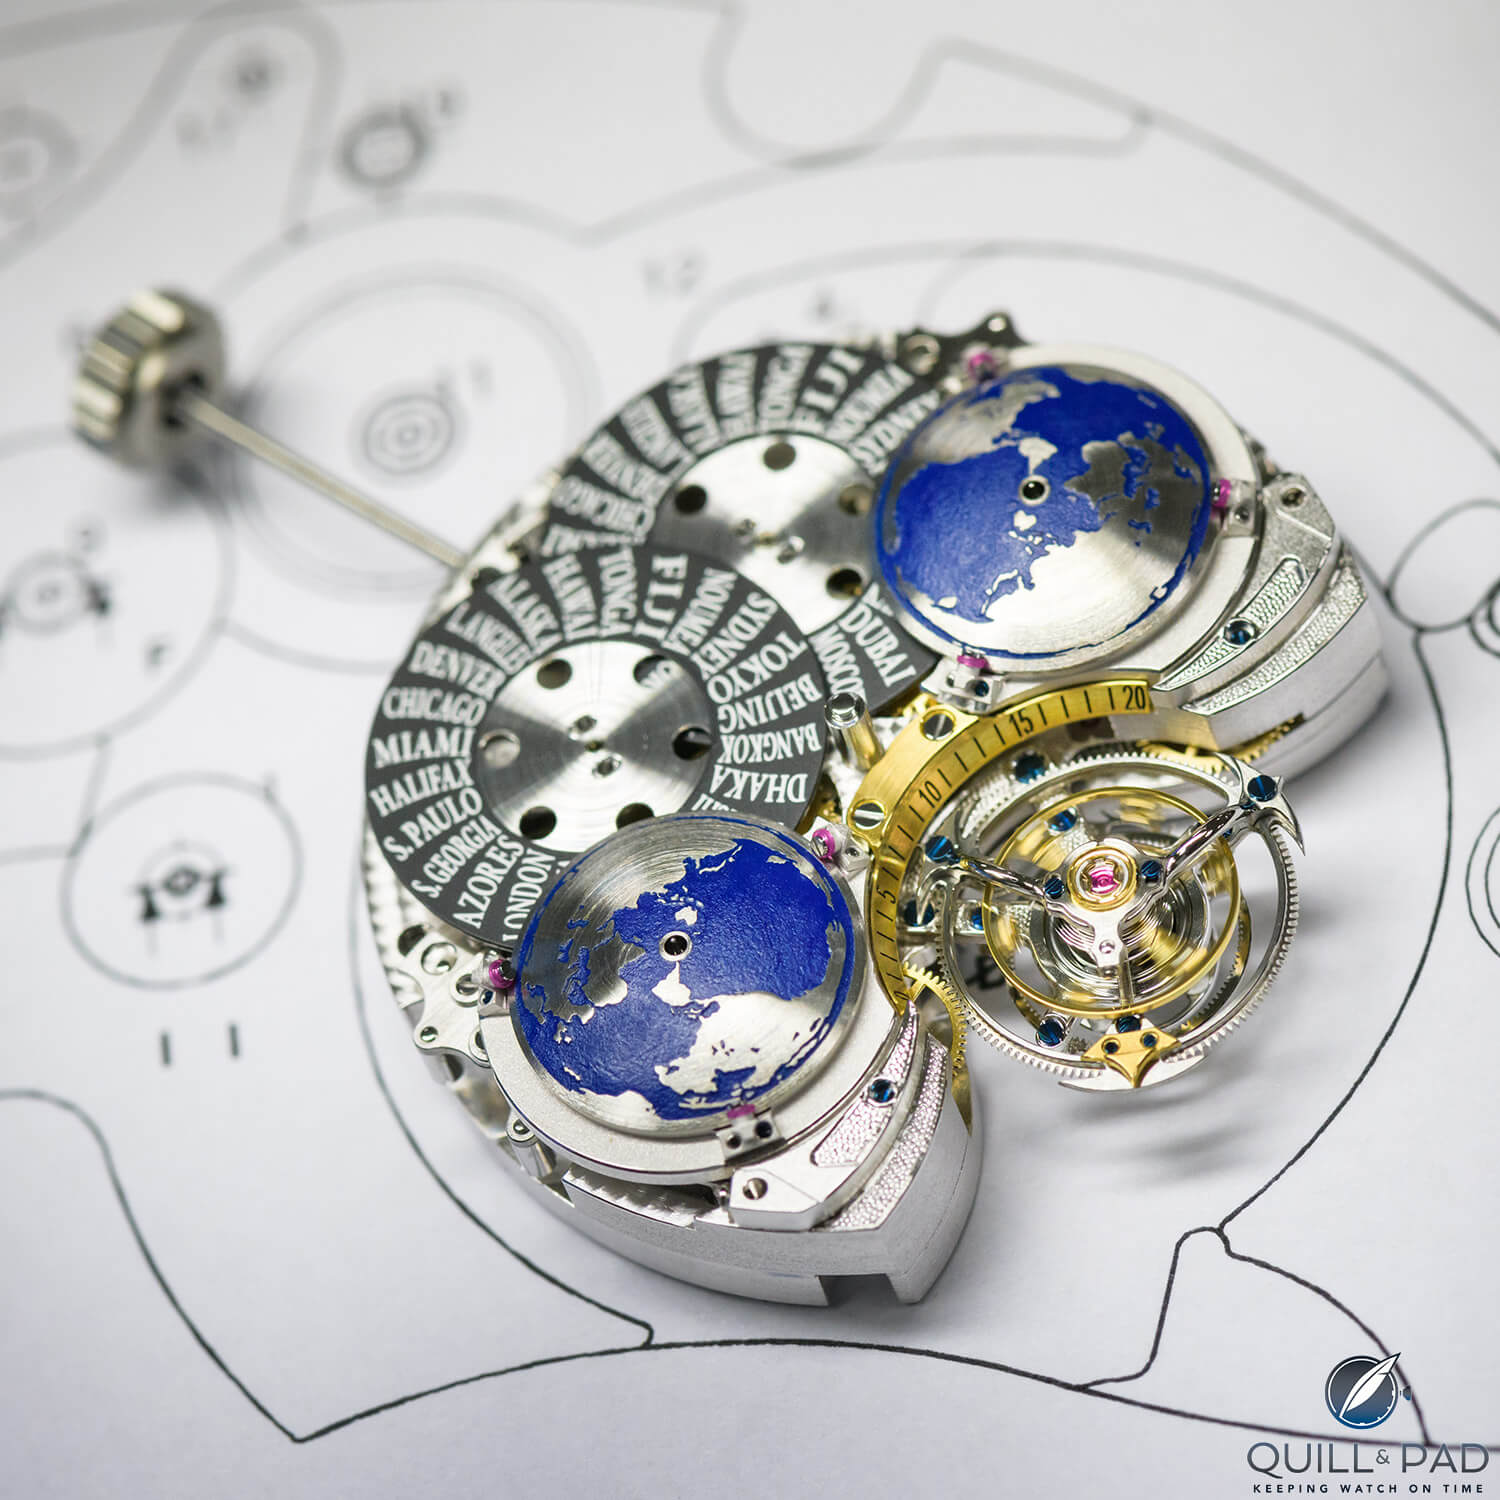 Movement in assembly of the Patented movement of the Edouard Bovet Flying Tourbillon (photo courtesy www.patriceschreyer.com)